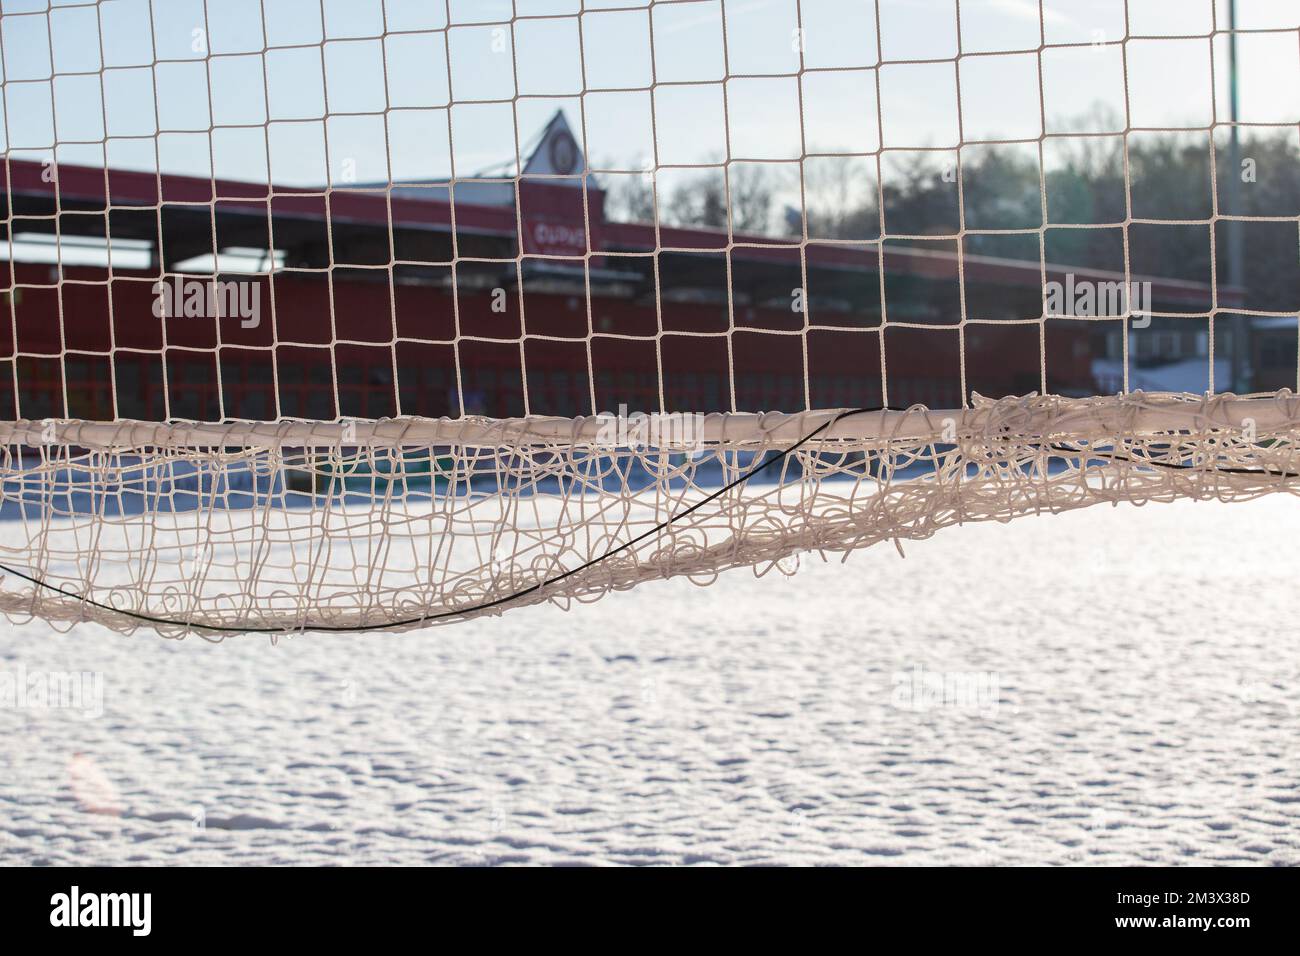 Snow covered football / soccer pitch in wintery scene at English football ground. Lamex Stadium, Stevenage FC, Stock Photo